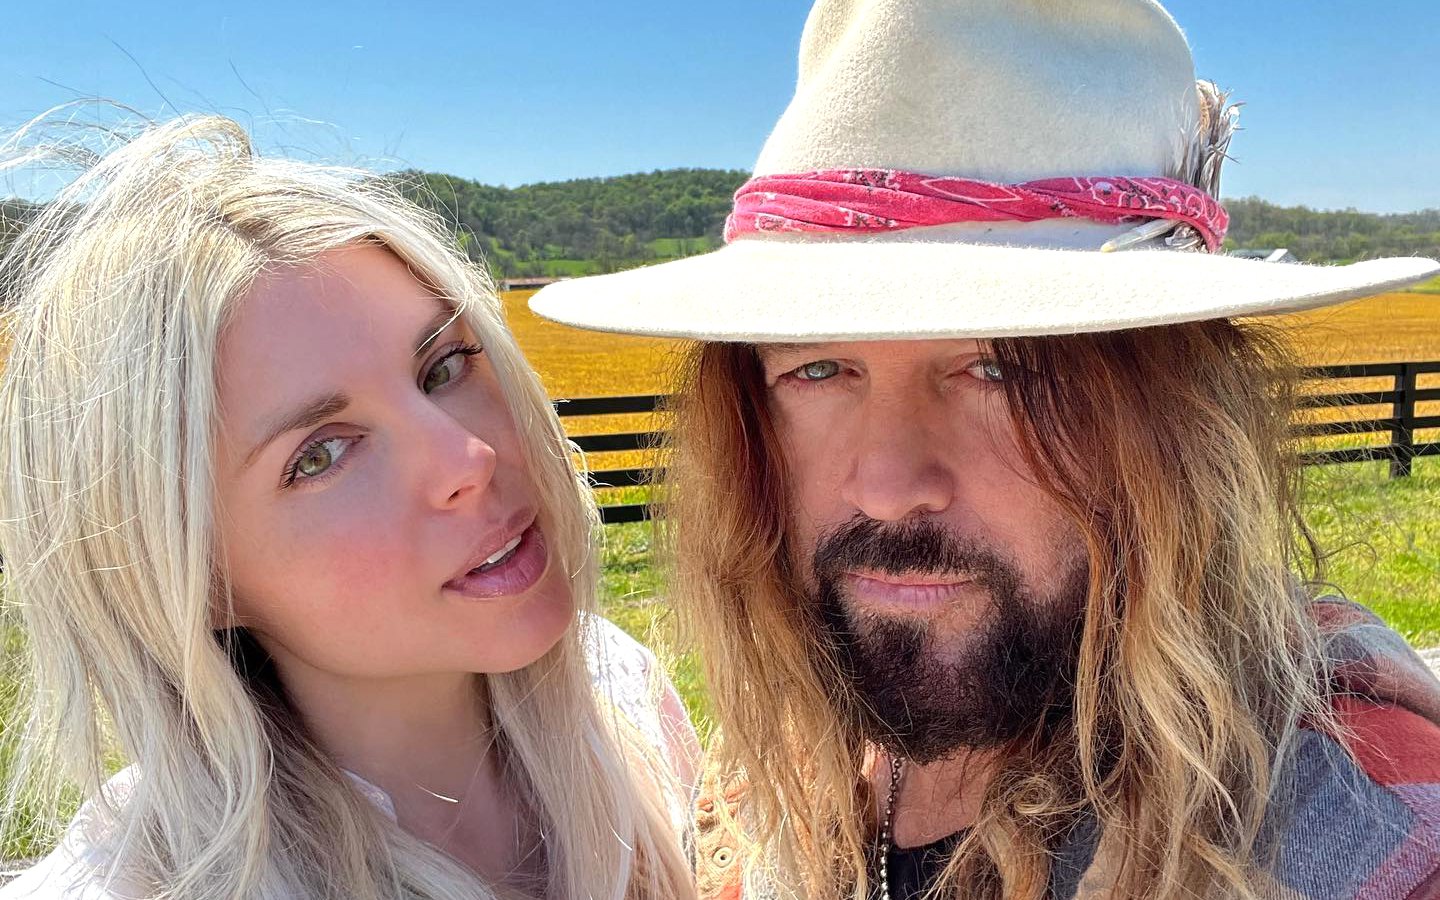 Billy Ray Cyrus and Firerose Are Married Nearly 1 Year After Engagement